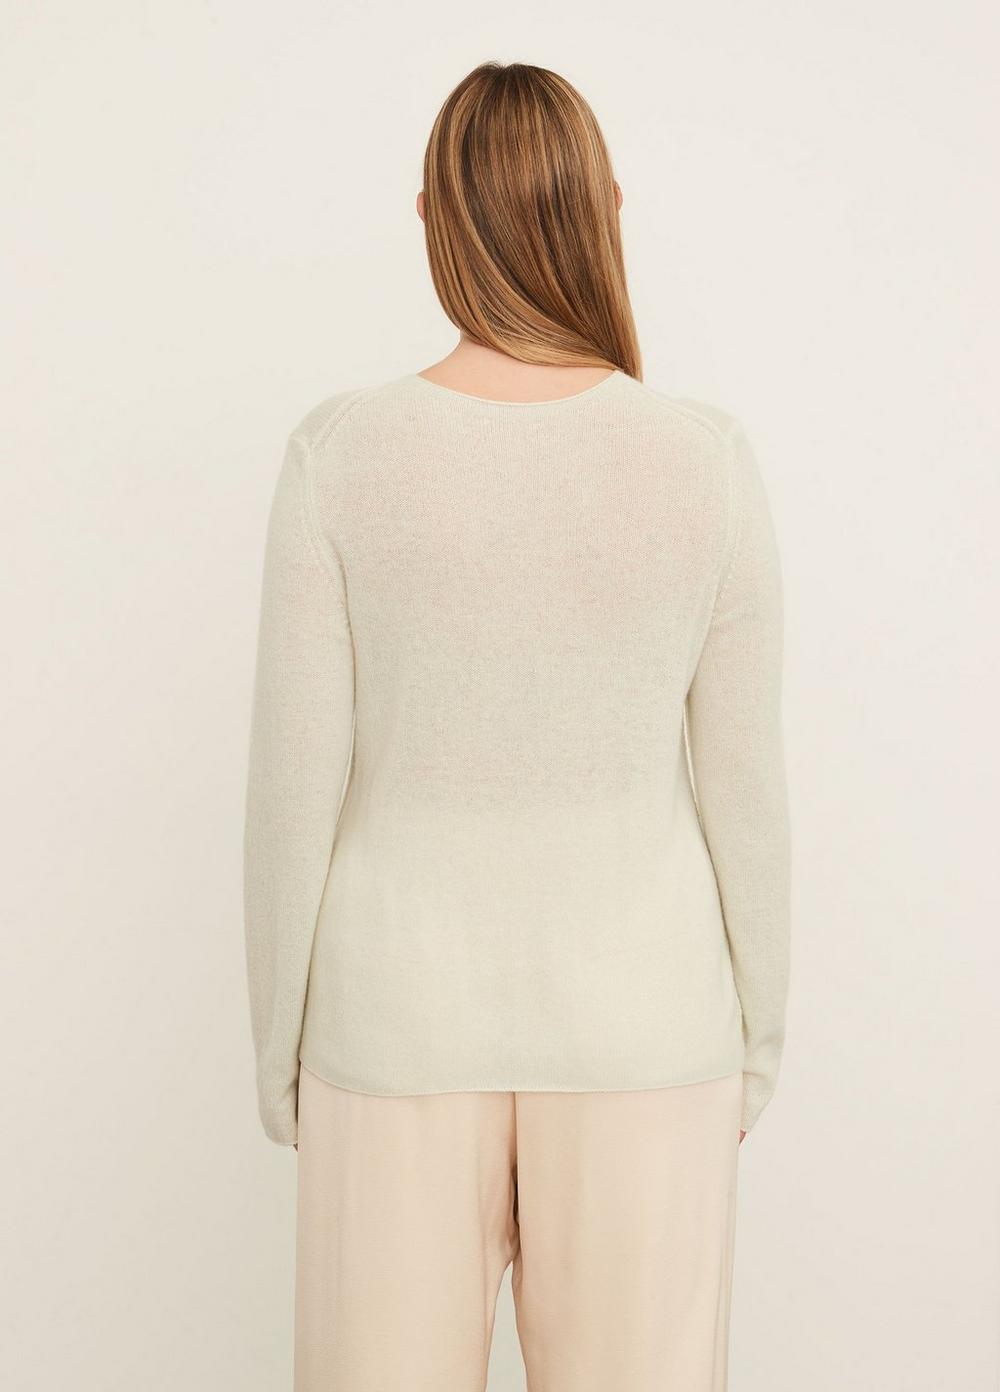 Cashmere Trimless Pullover Sweater